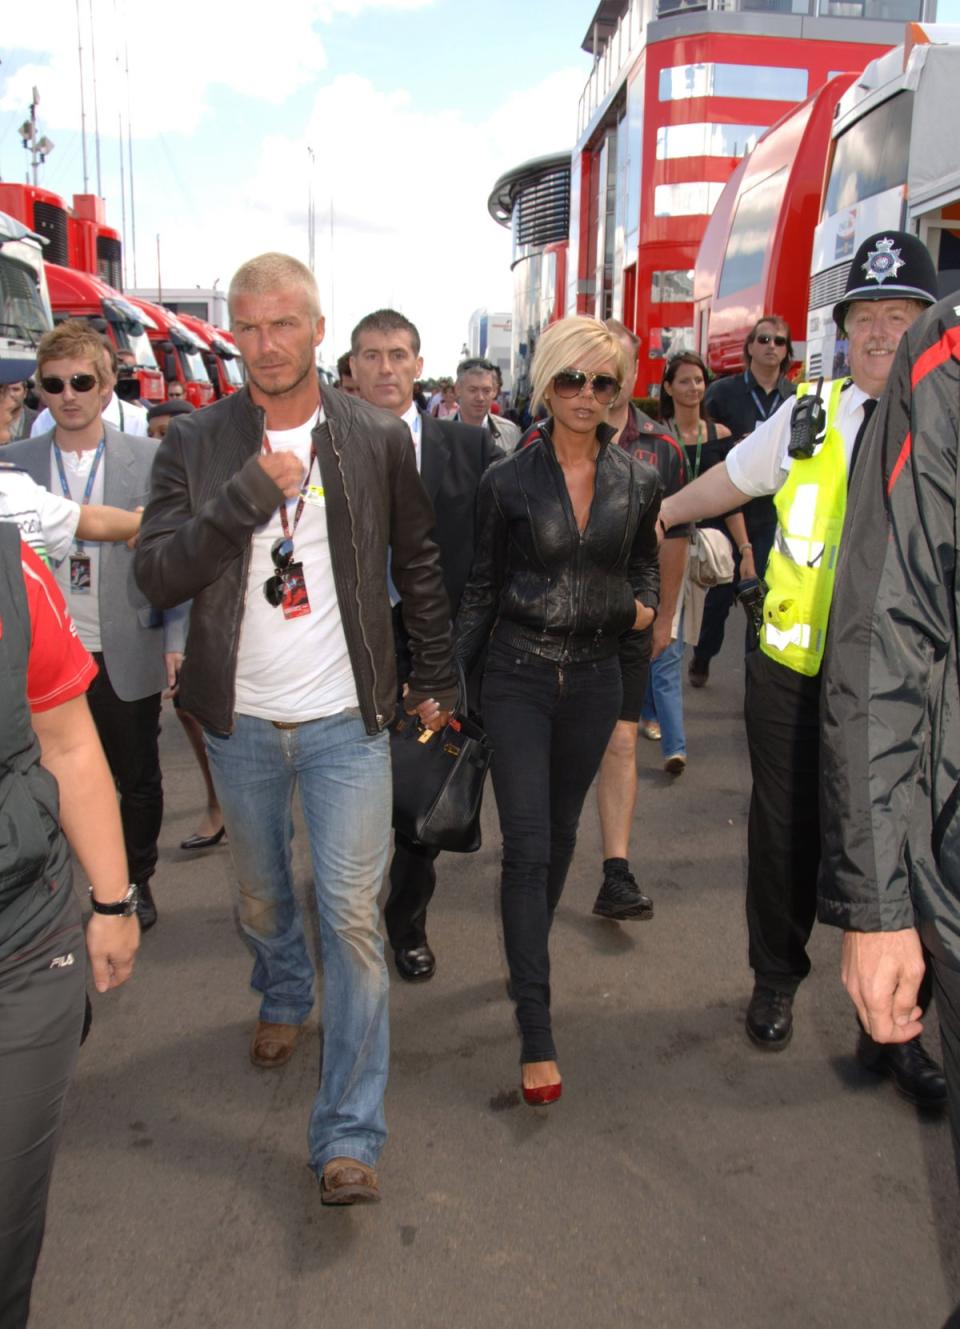 With David Beckham at the F1 Grand Prix at Silverstone on July 8, 2007 (Dave Benett)